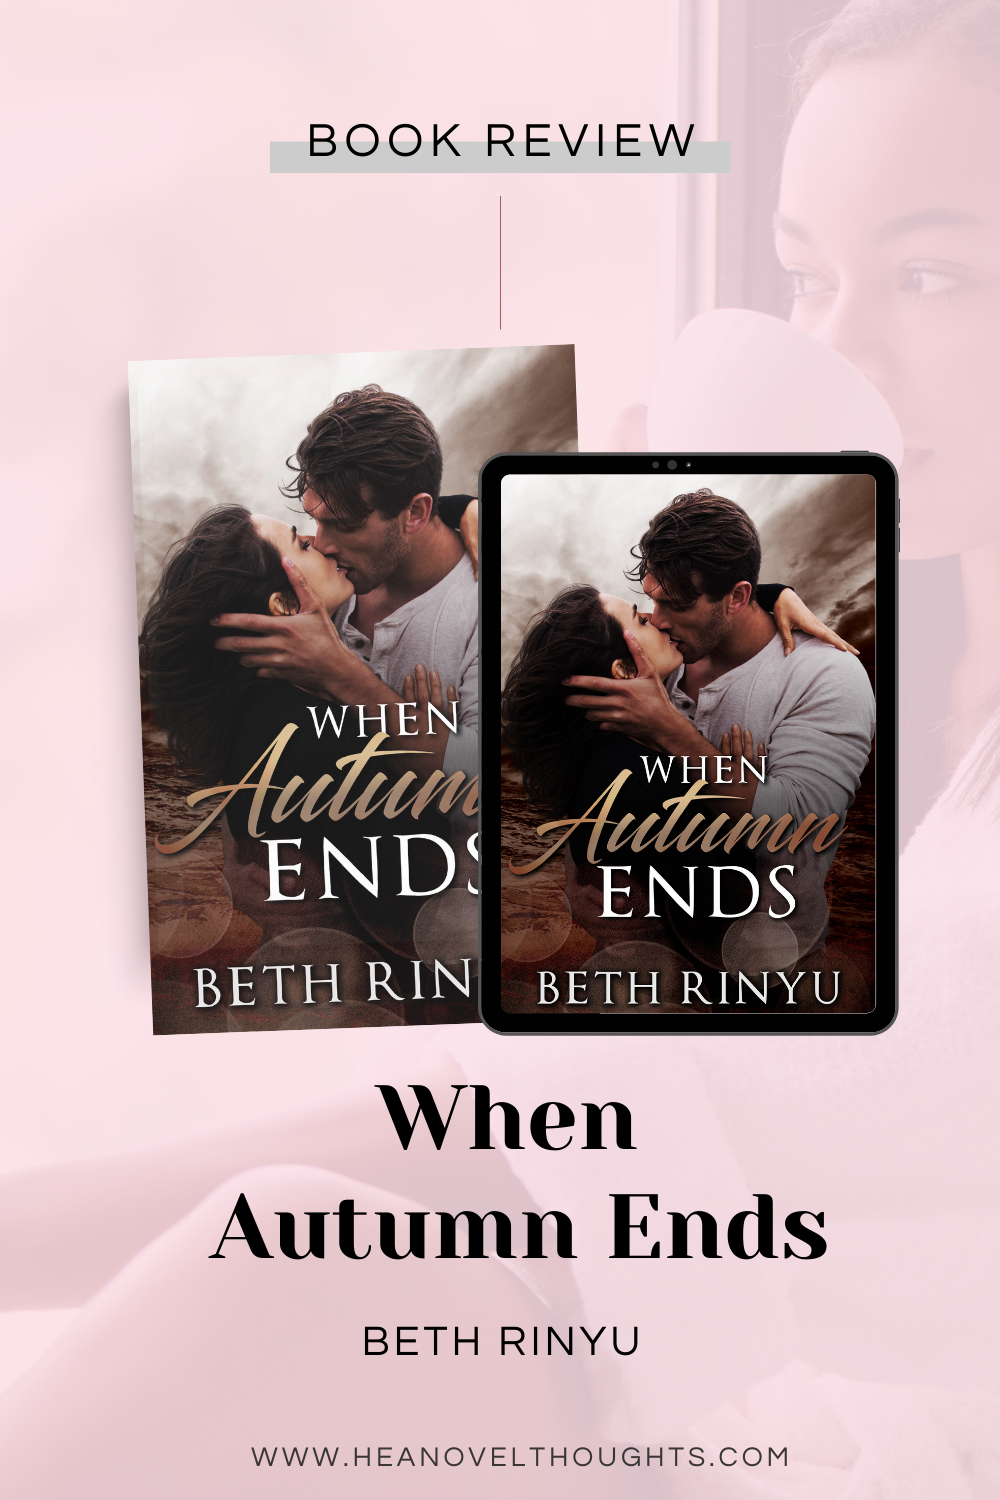 When Autumn Ends by Beth Rinyu